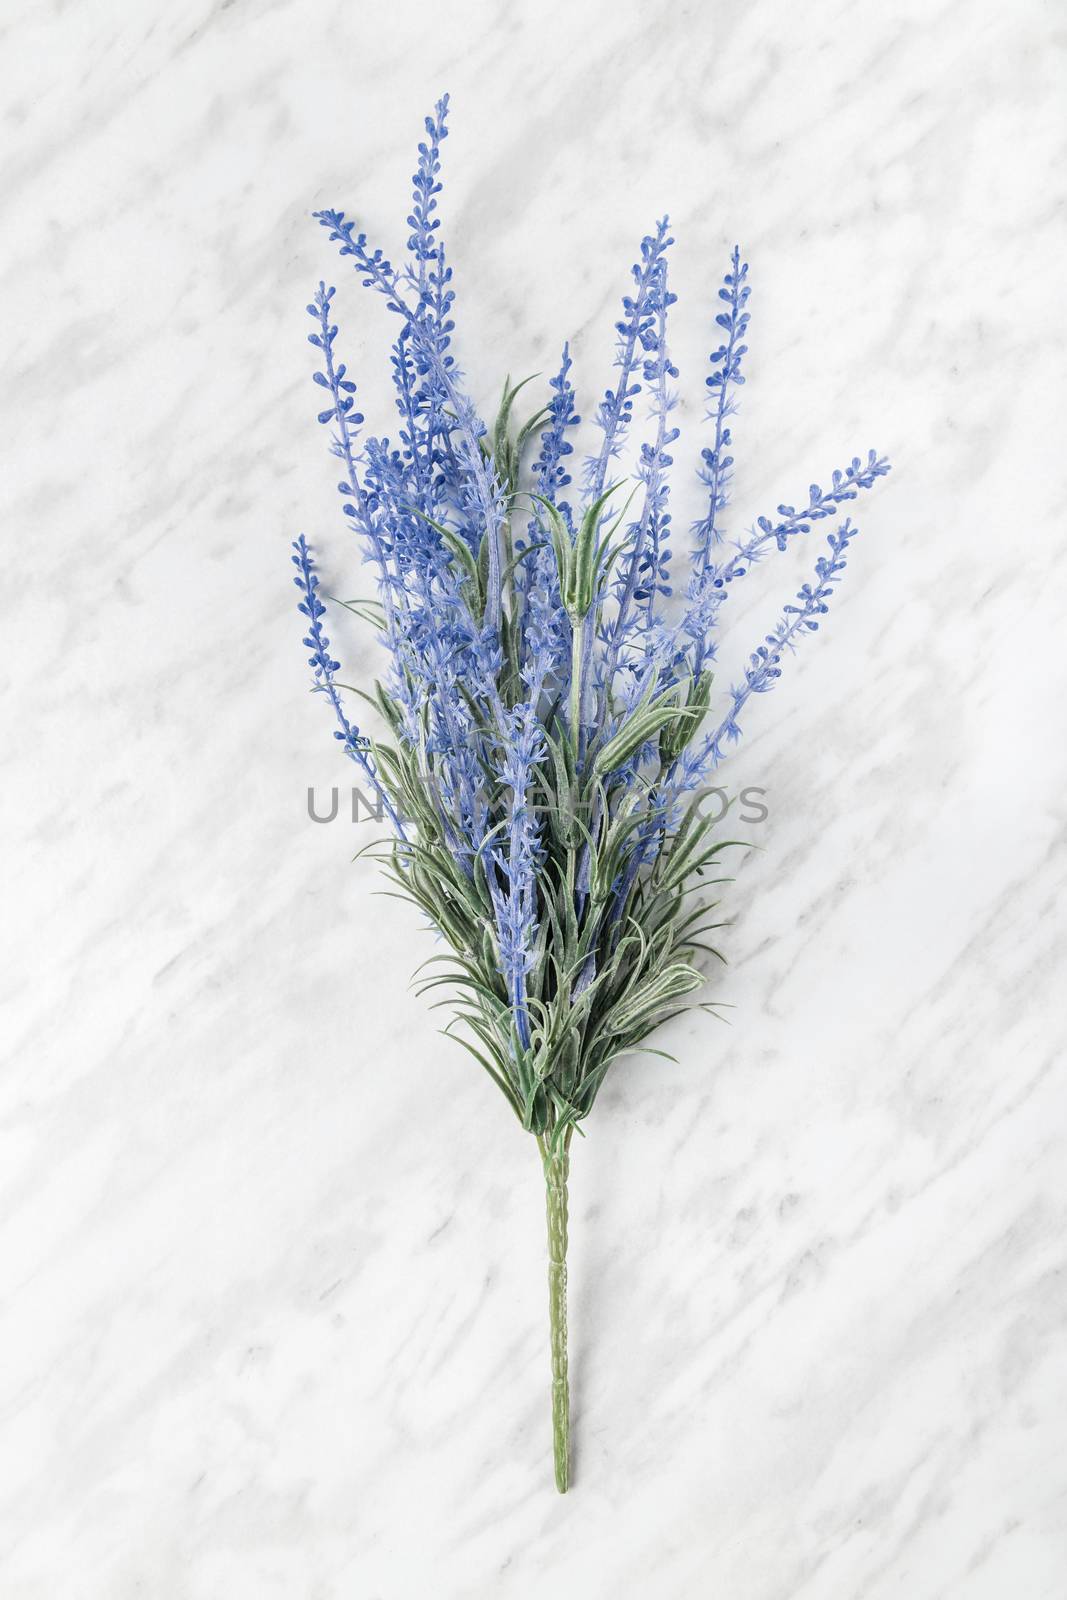 Blooming lavender on light gray marble background.